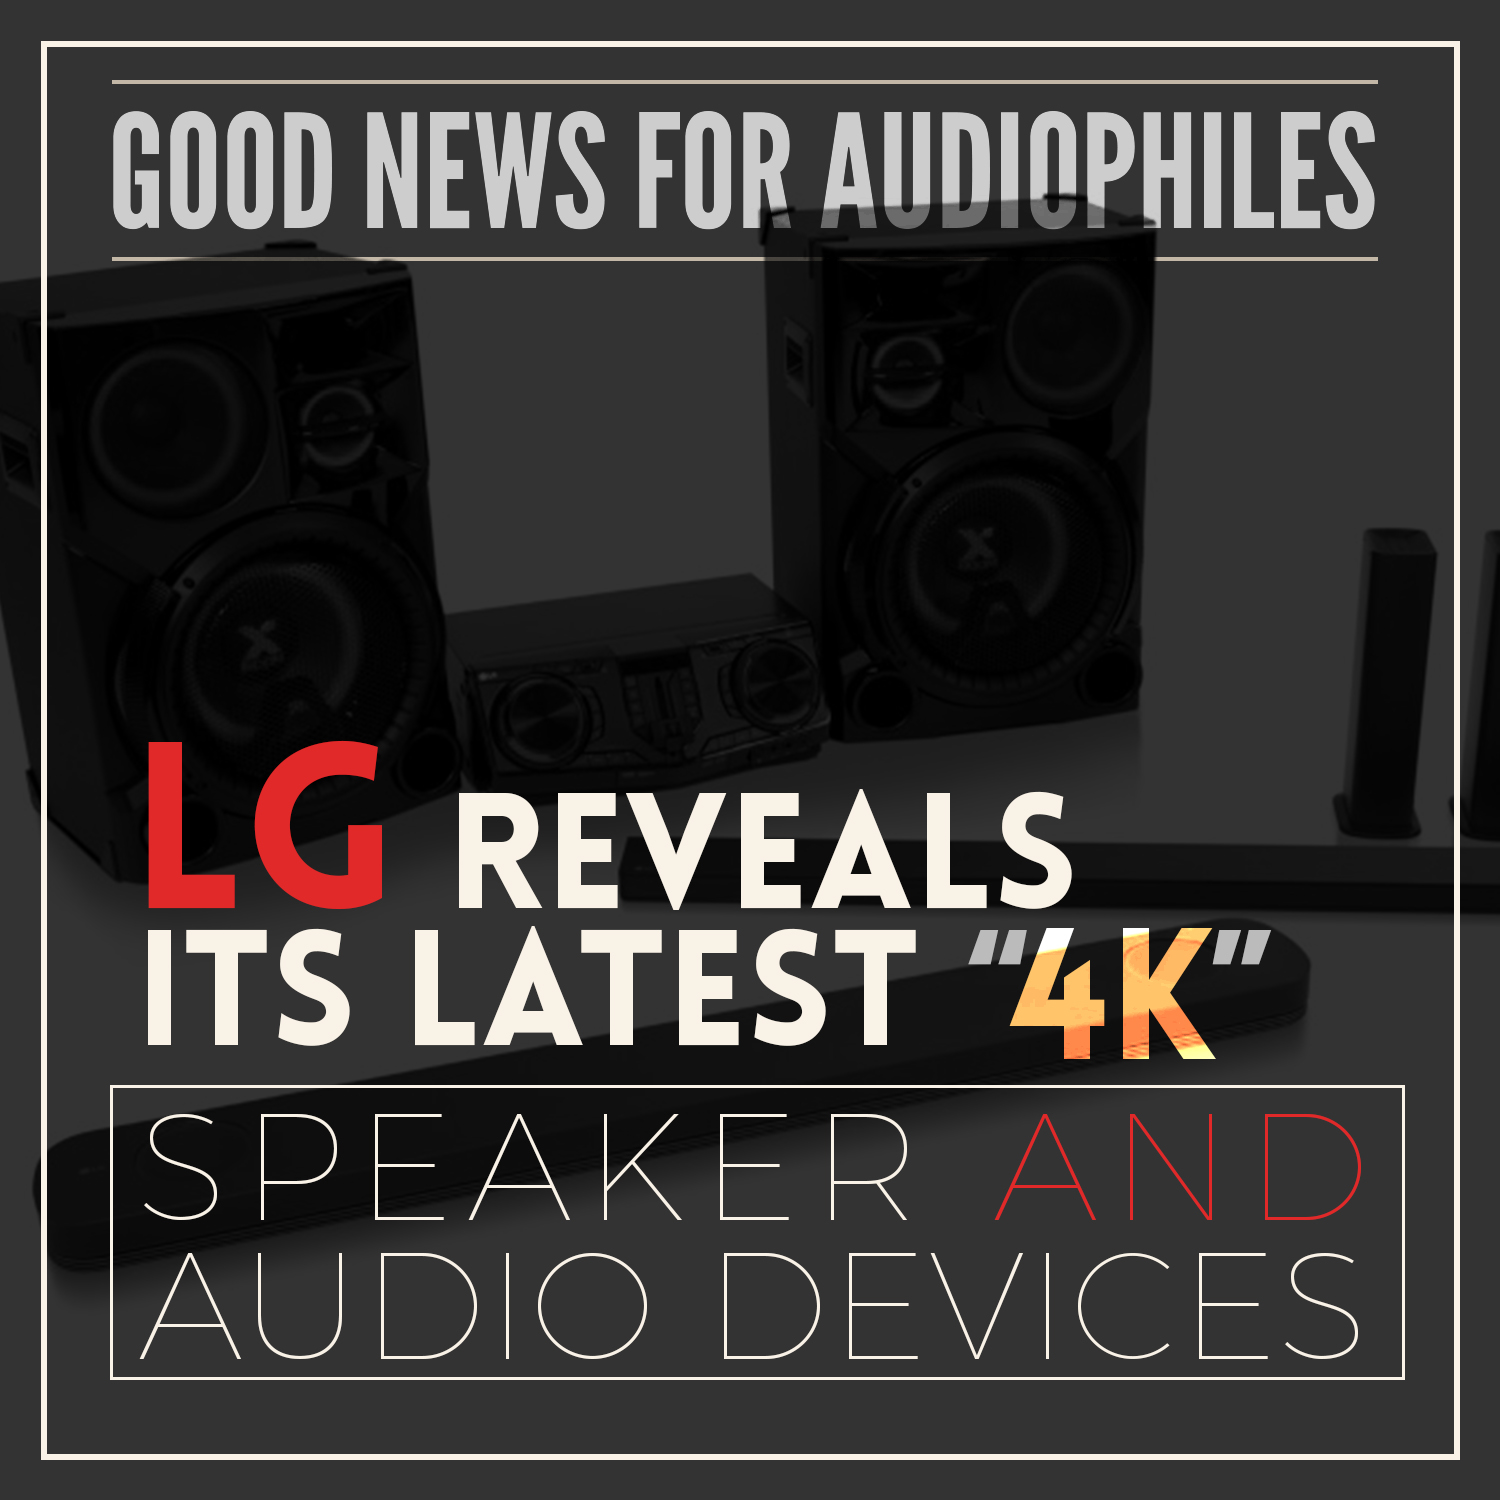 LG reveals its latest ‘4K’ speaker and audio devices